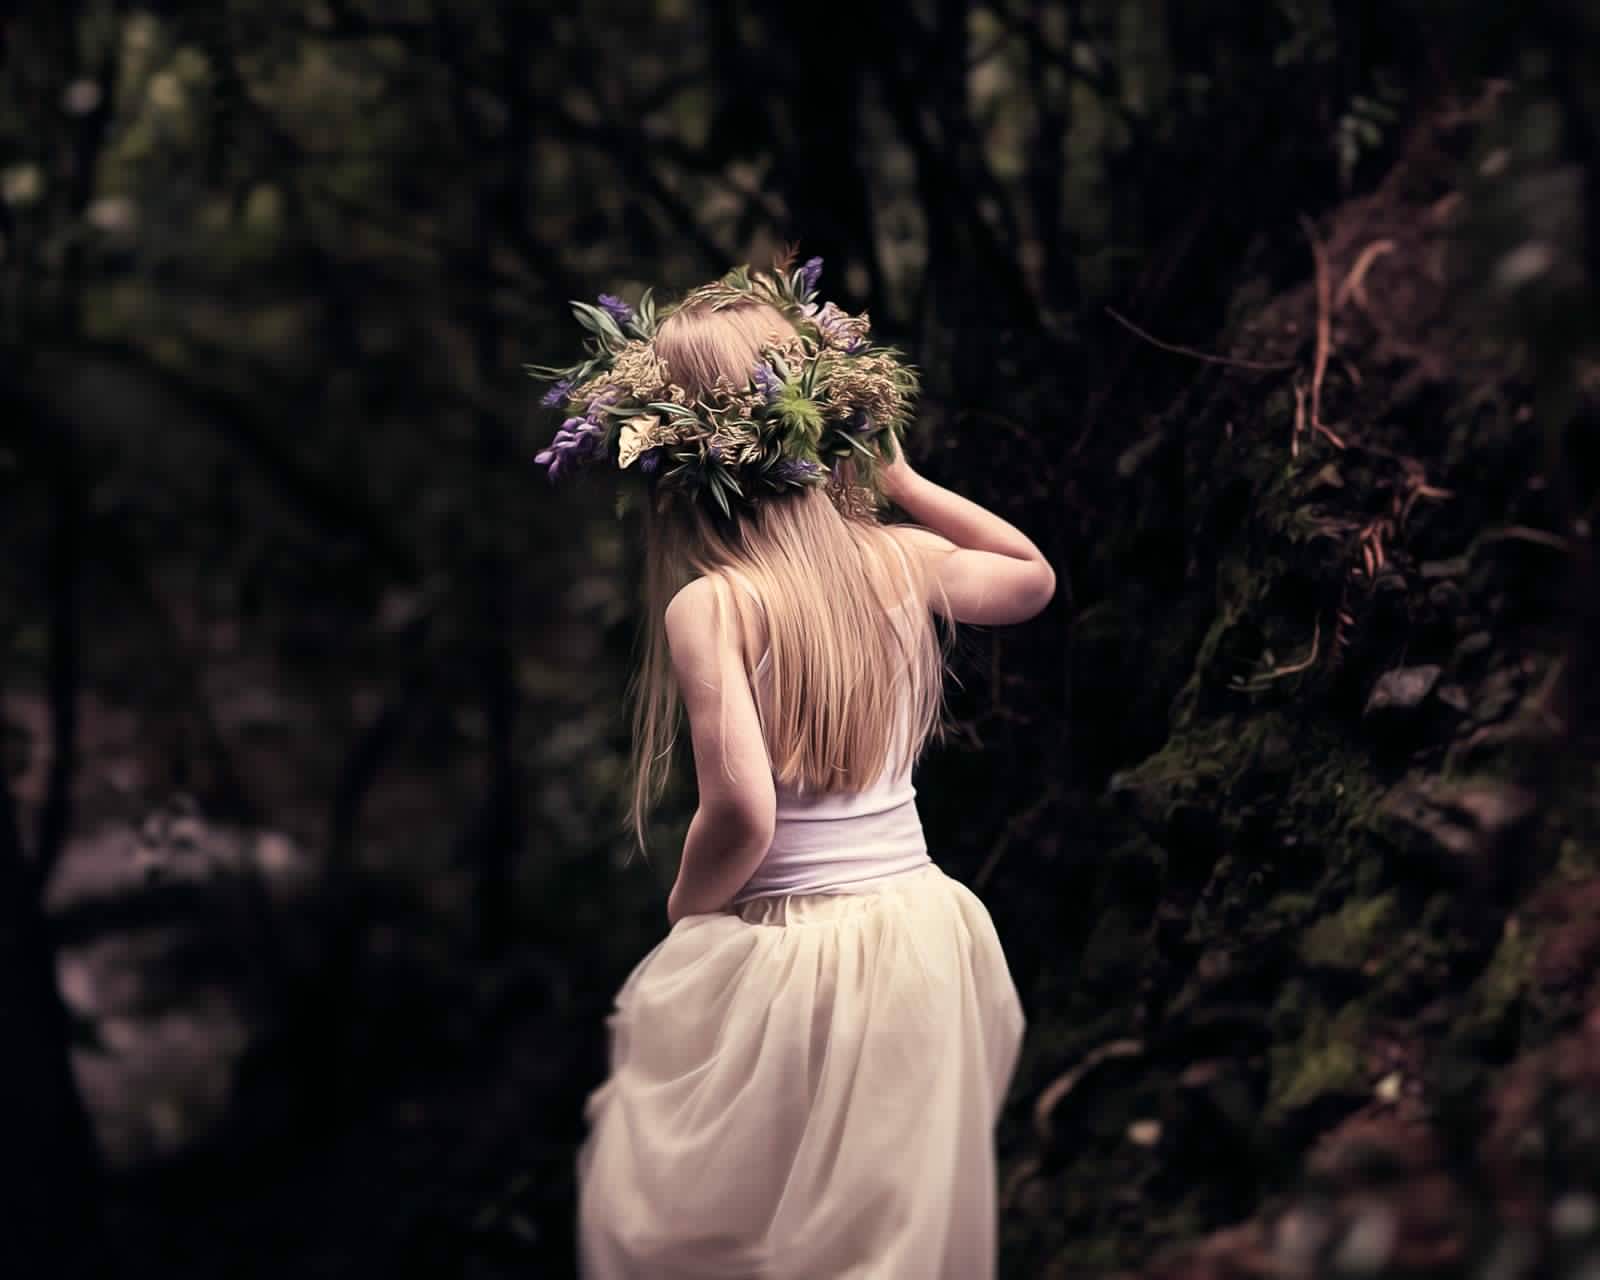 blond girl, white dress, flower crown, in a forrest, digital oil painting